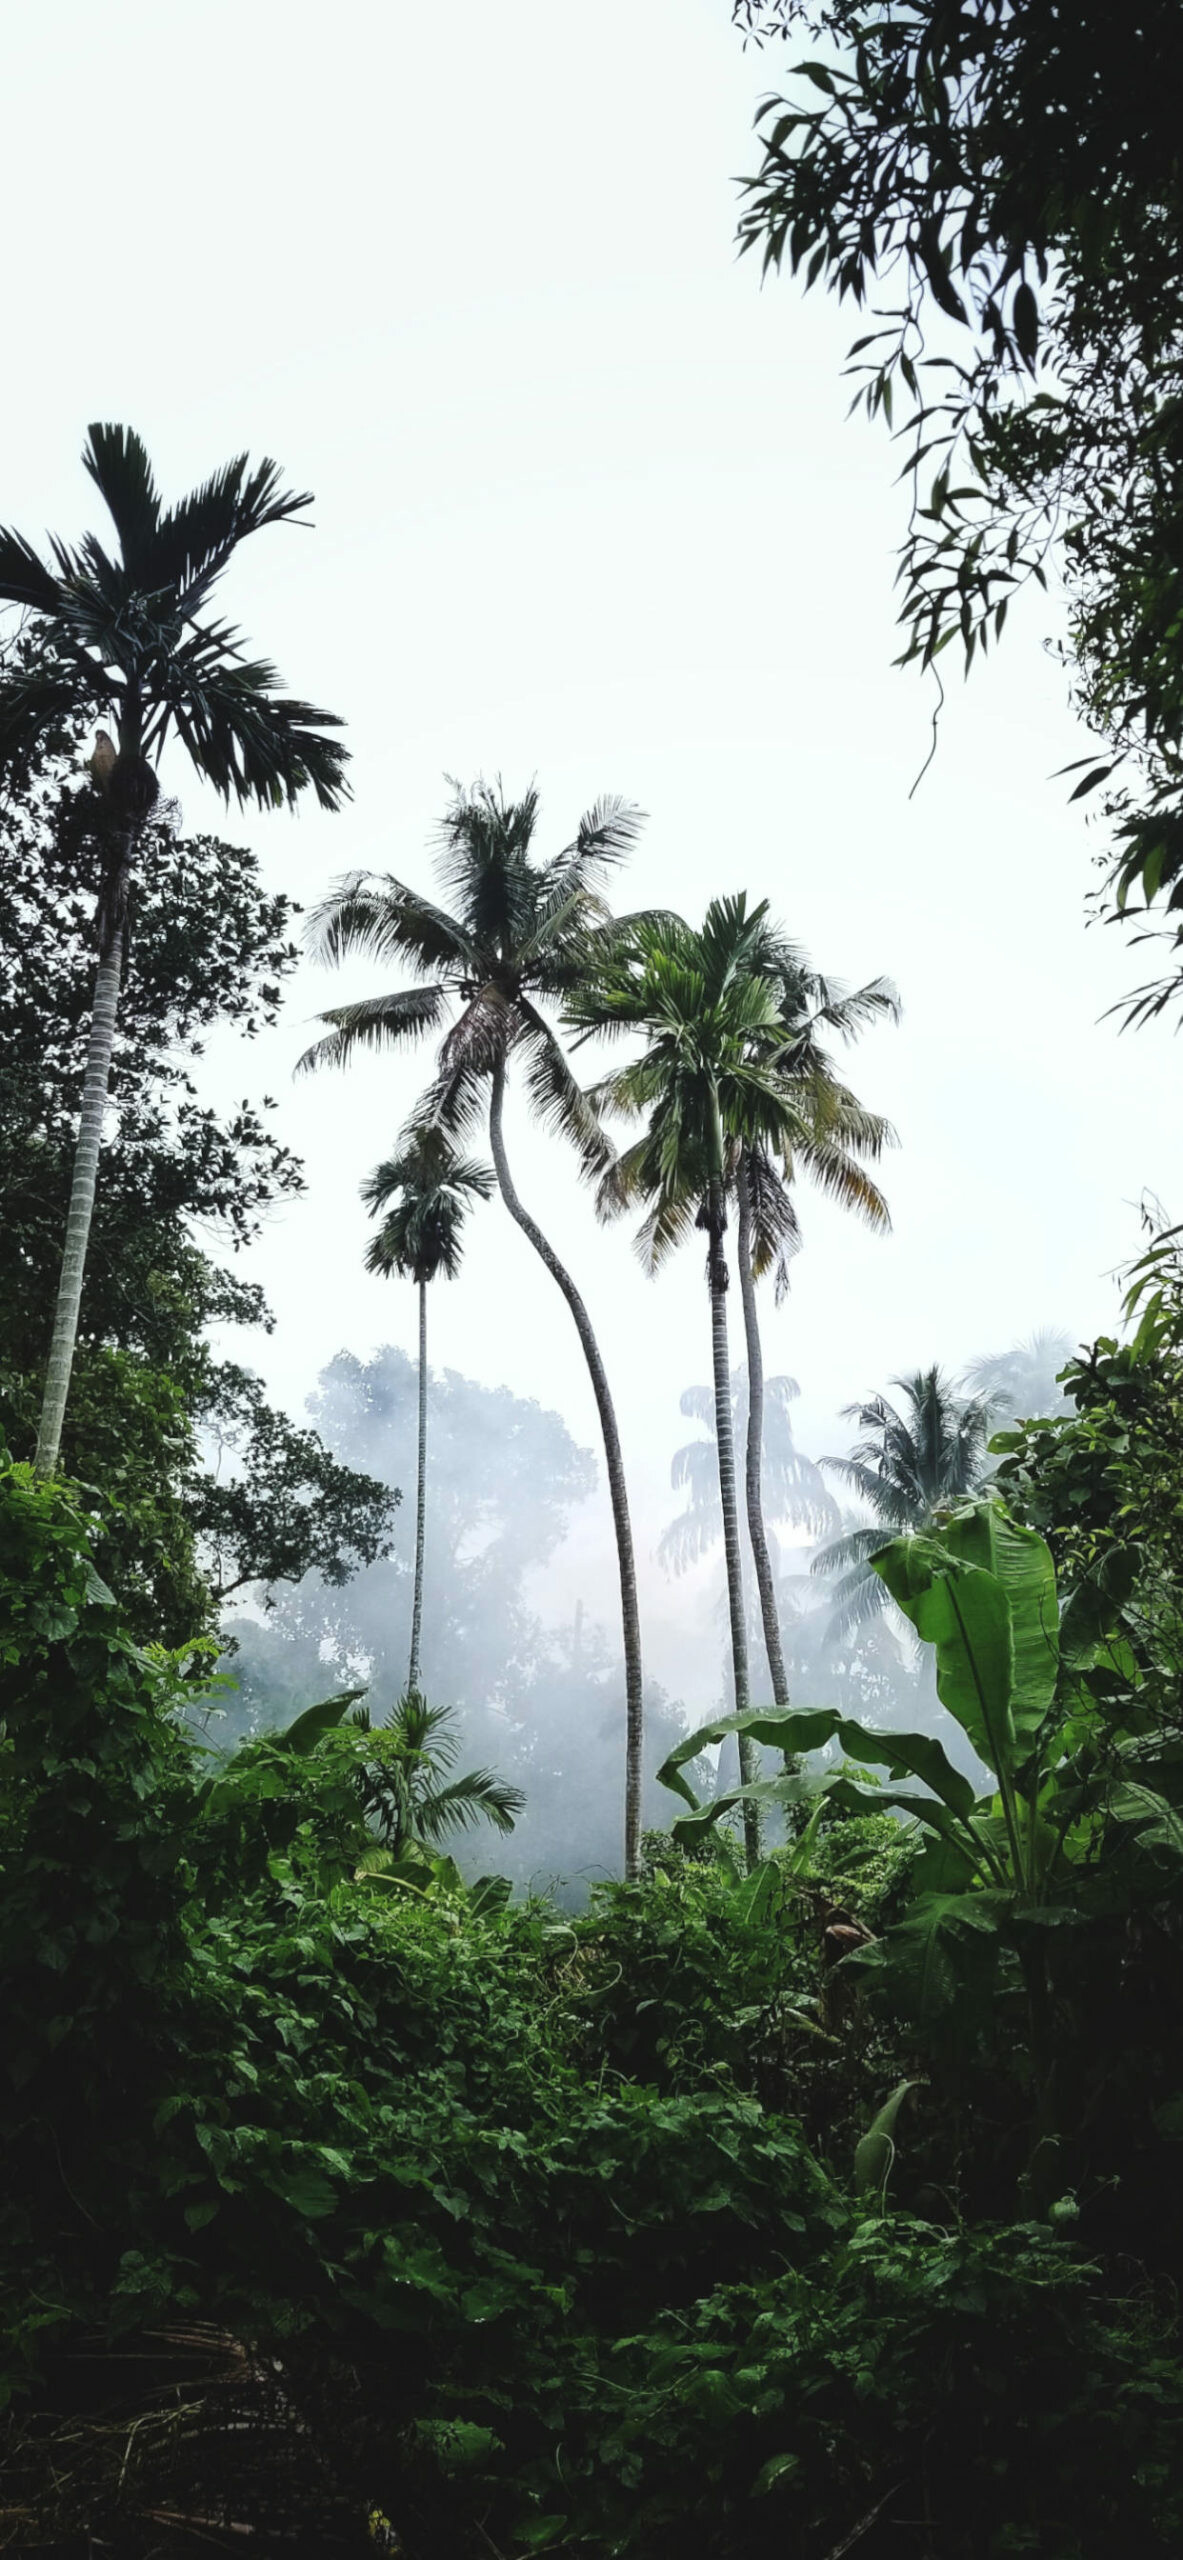 Jungle: The home to more than 30 million species of animals and plants. 1190x2560 HD Background.